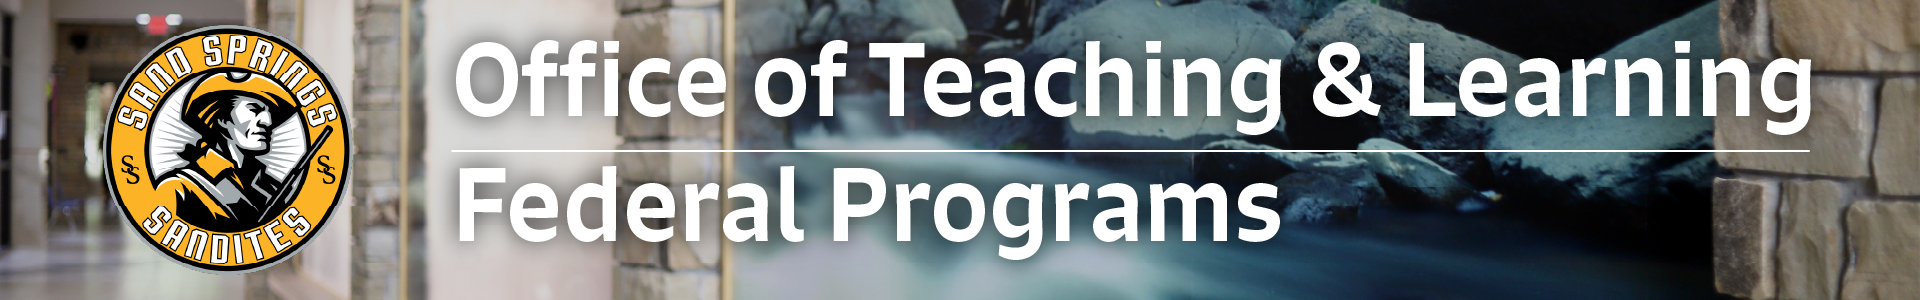 office of teaching and learning, federal programs